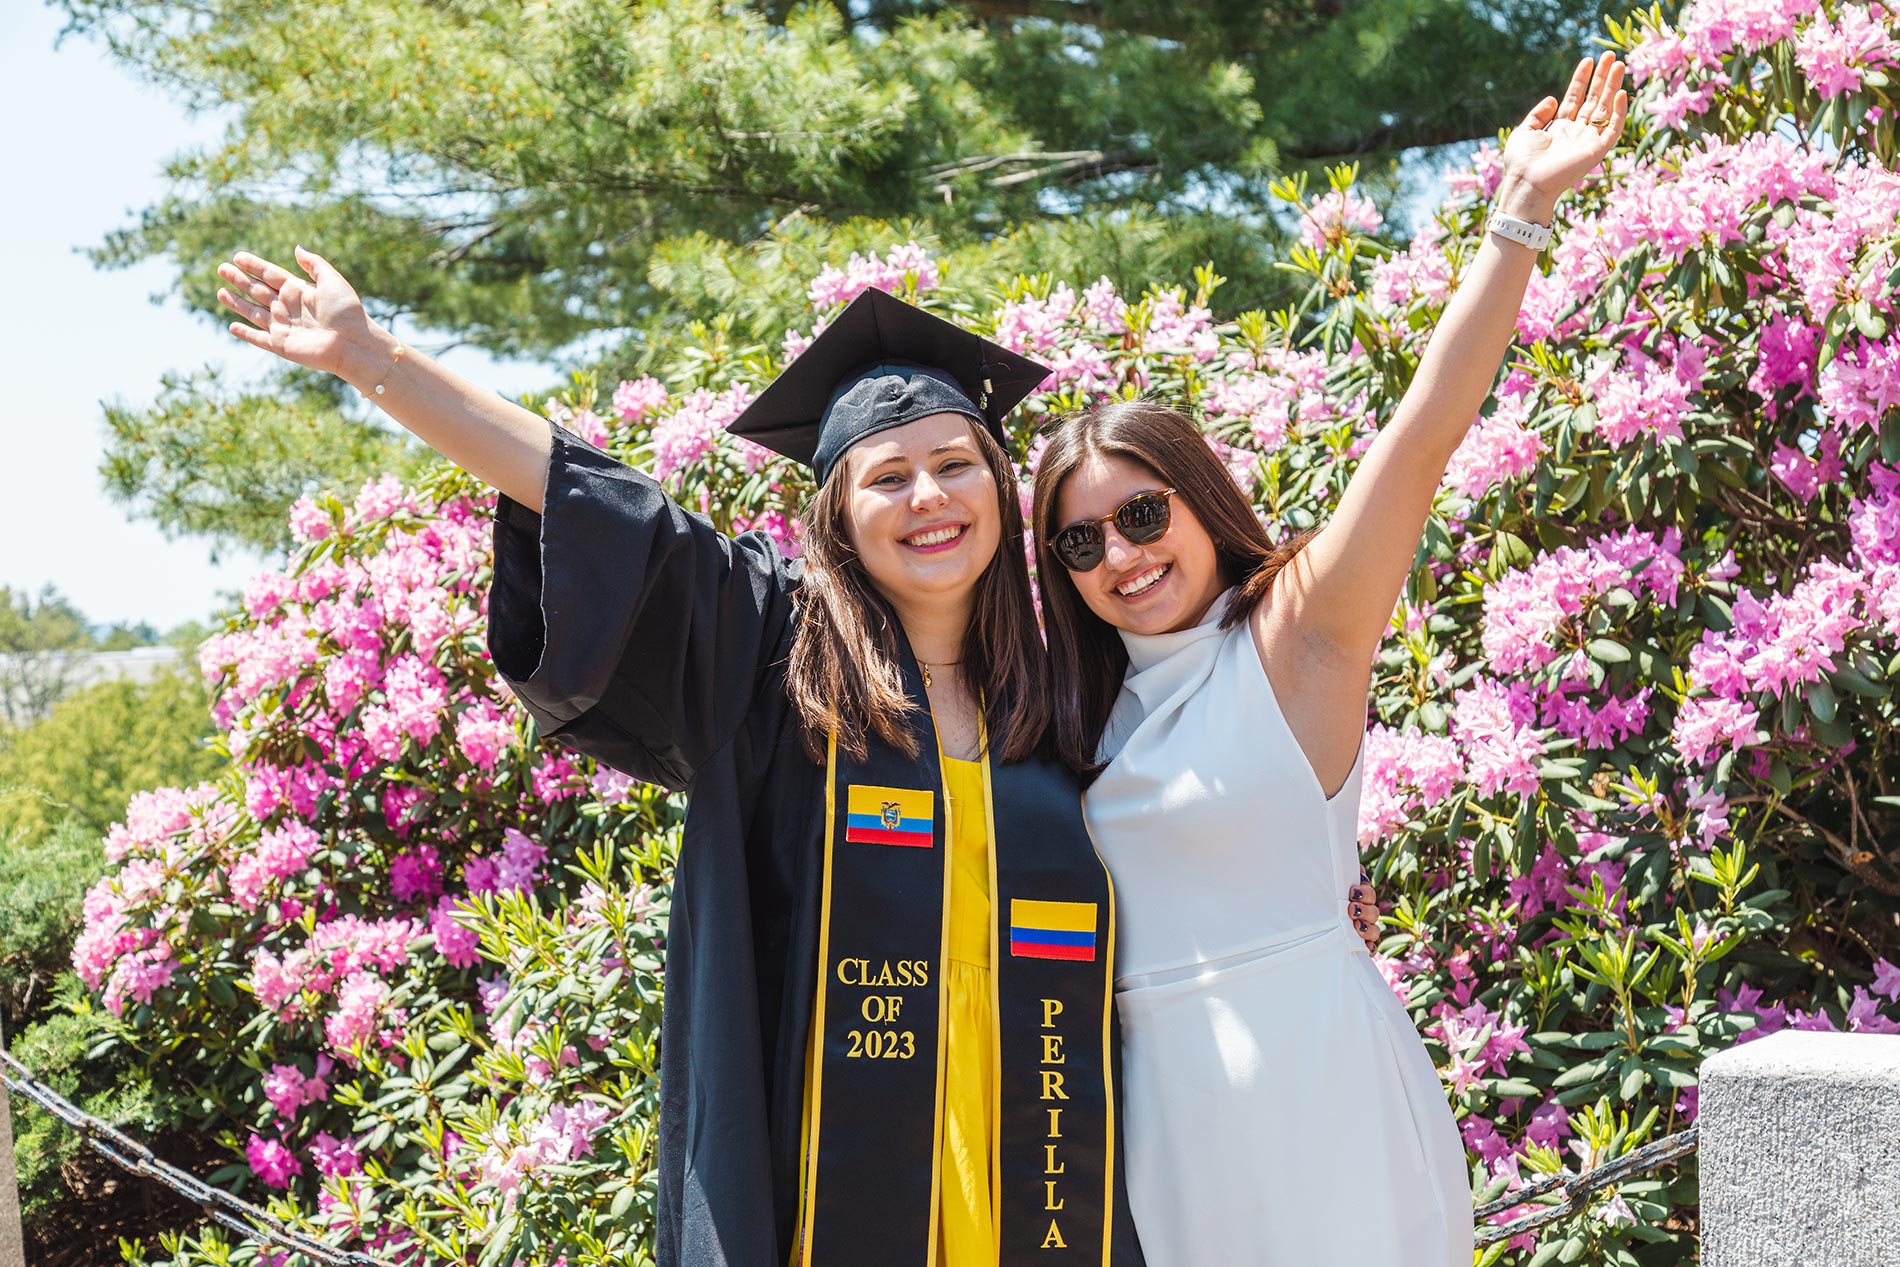 A graduate and her family member raise their arms in celebration.